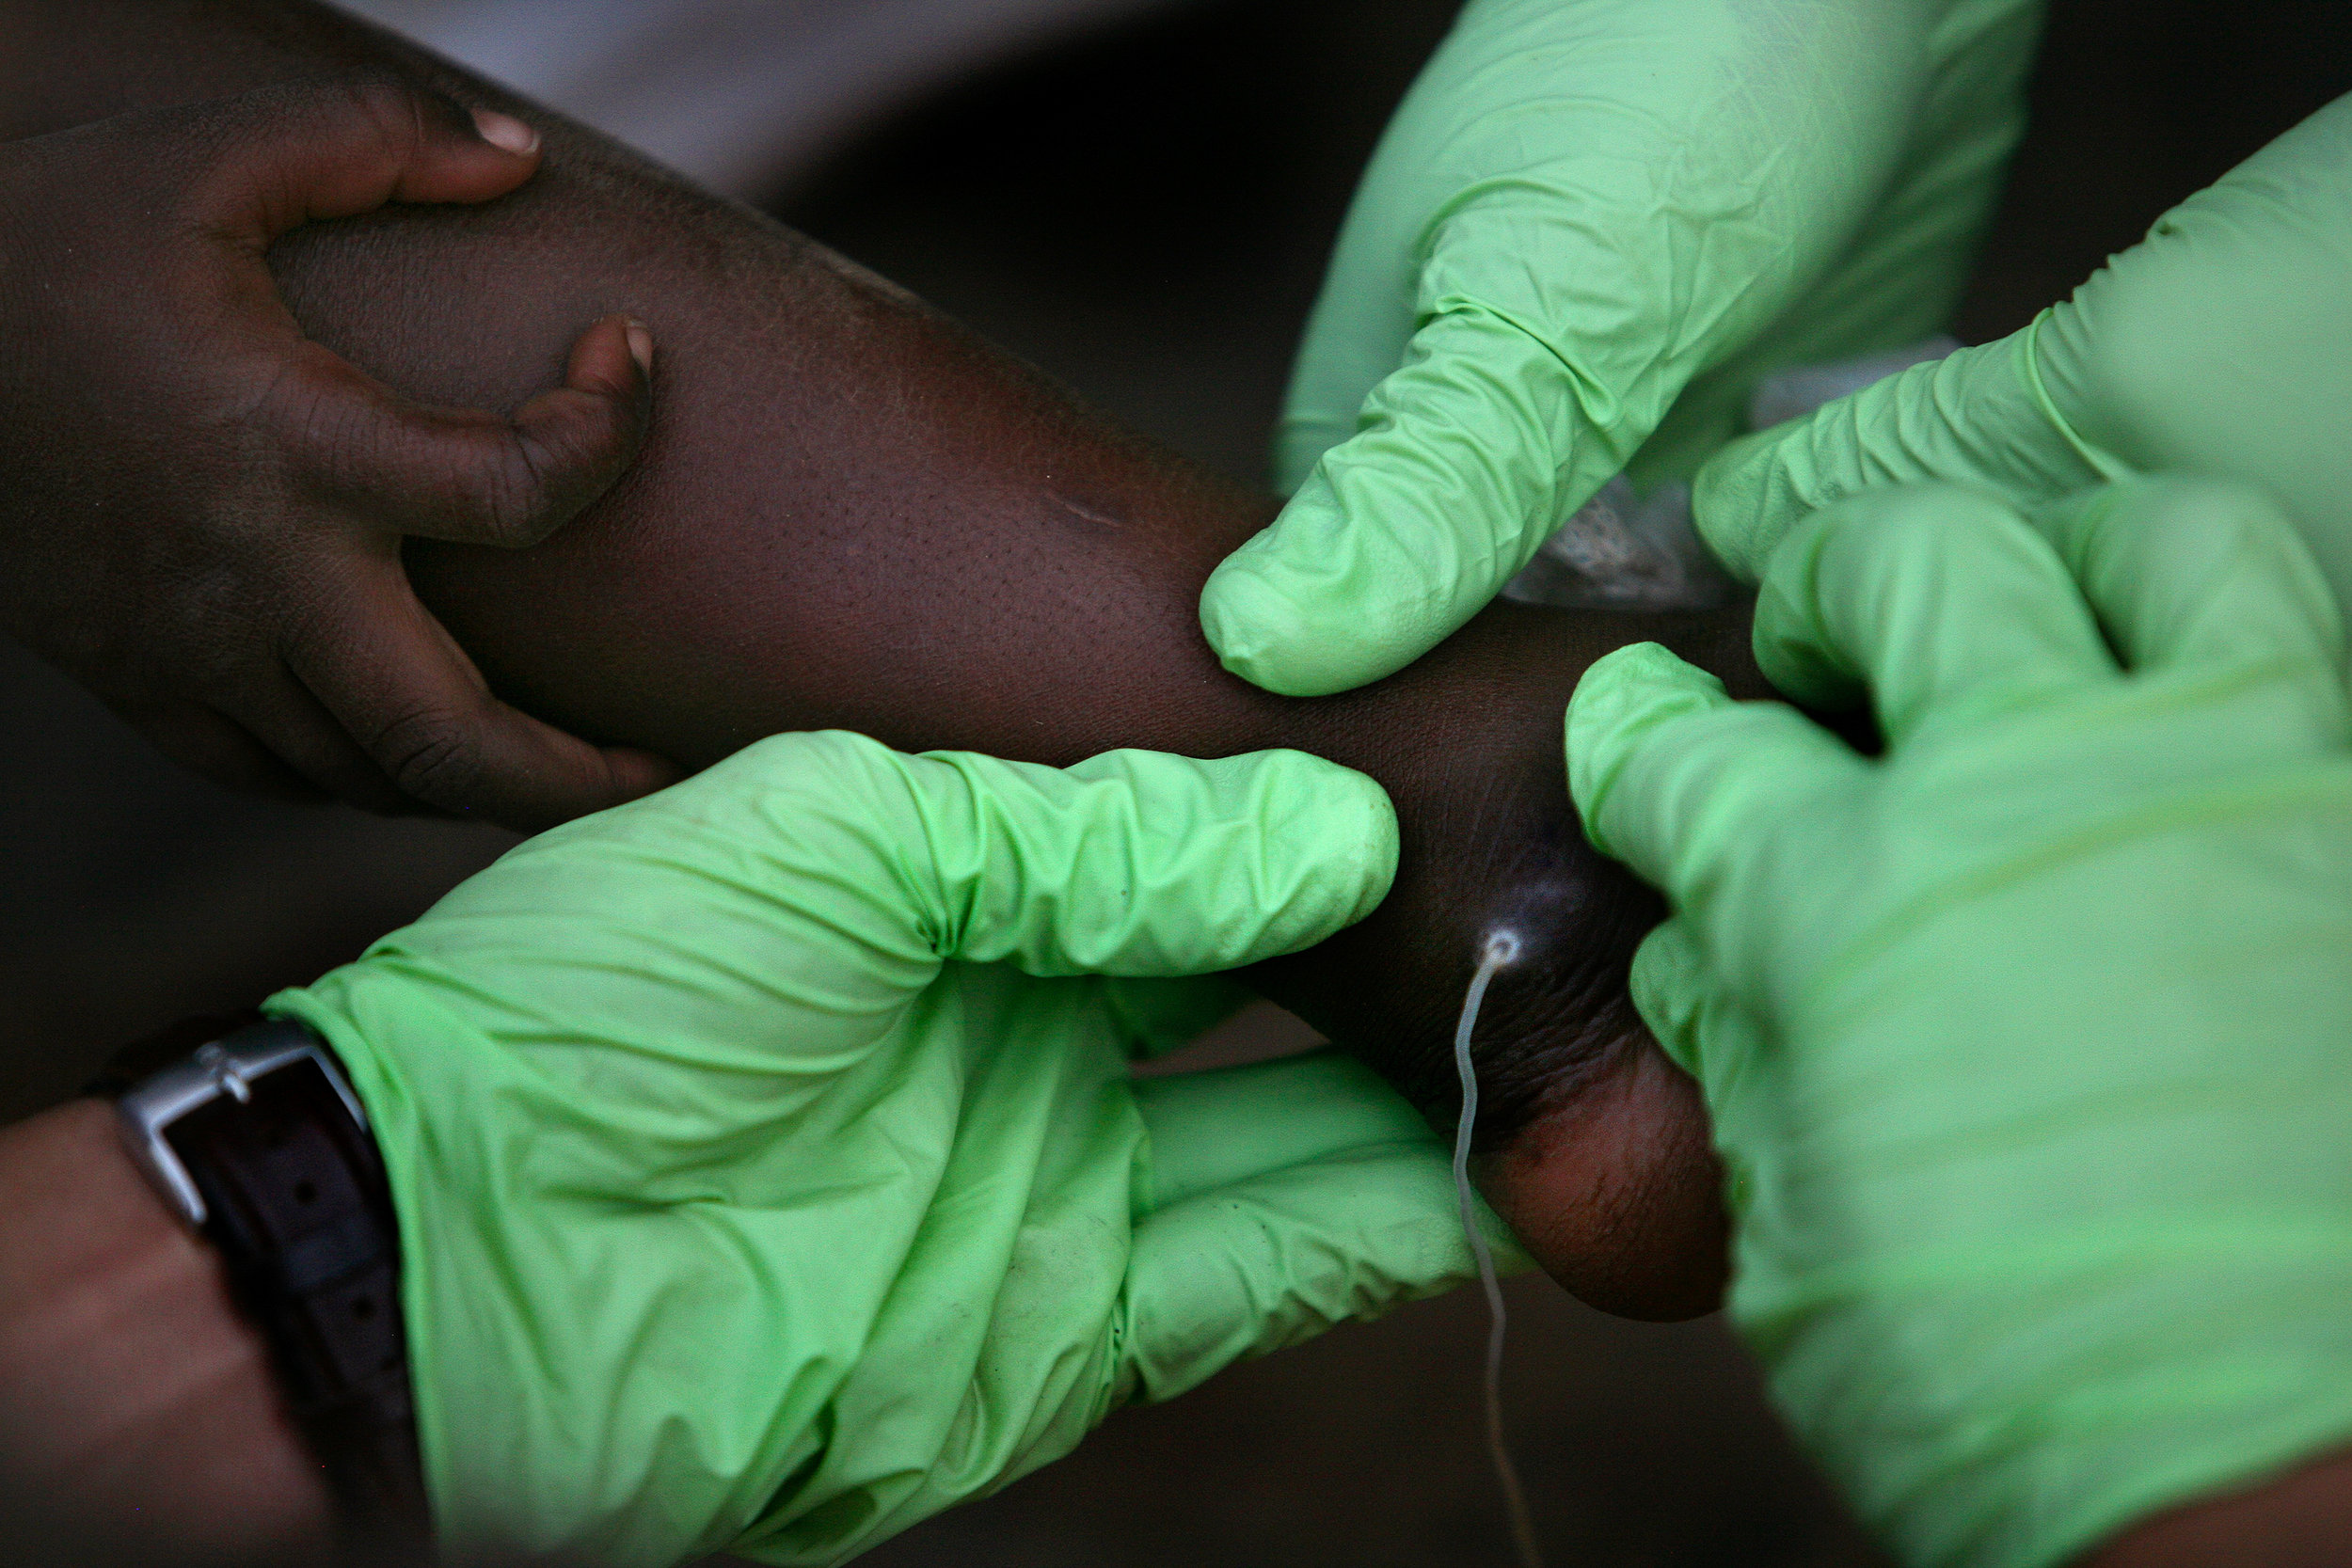  Health workers massage the area around a Guinea worm on four-year-old Samata Baba's ankle, hoping to pull more of the worm out, at Samata's home in Savelugu, Ghana on Jan. 26, 2008. During a painful bandaging routine, a patient's worm is pulled a li